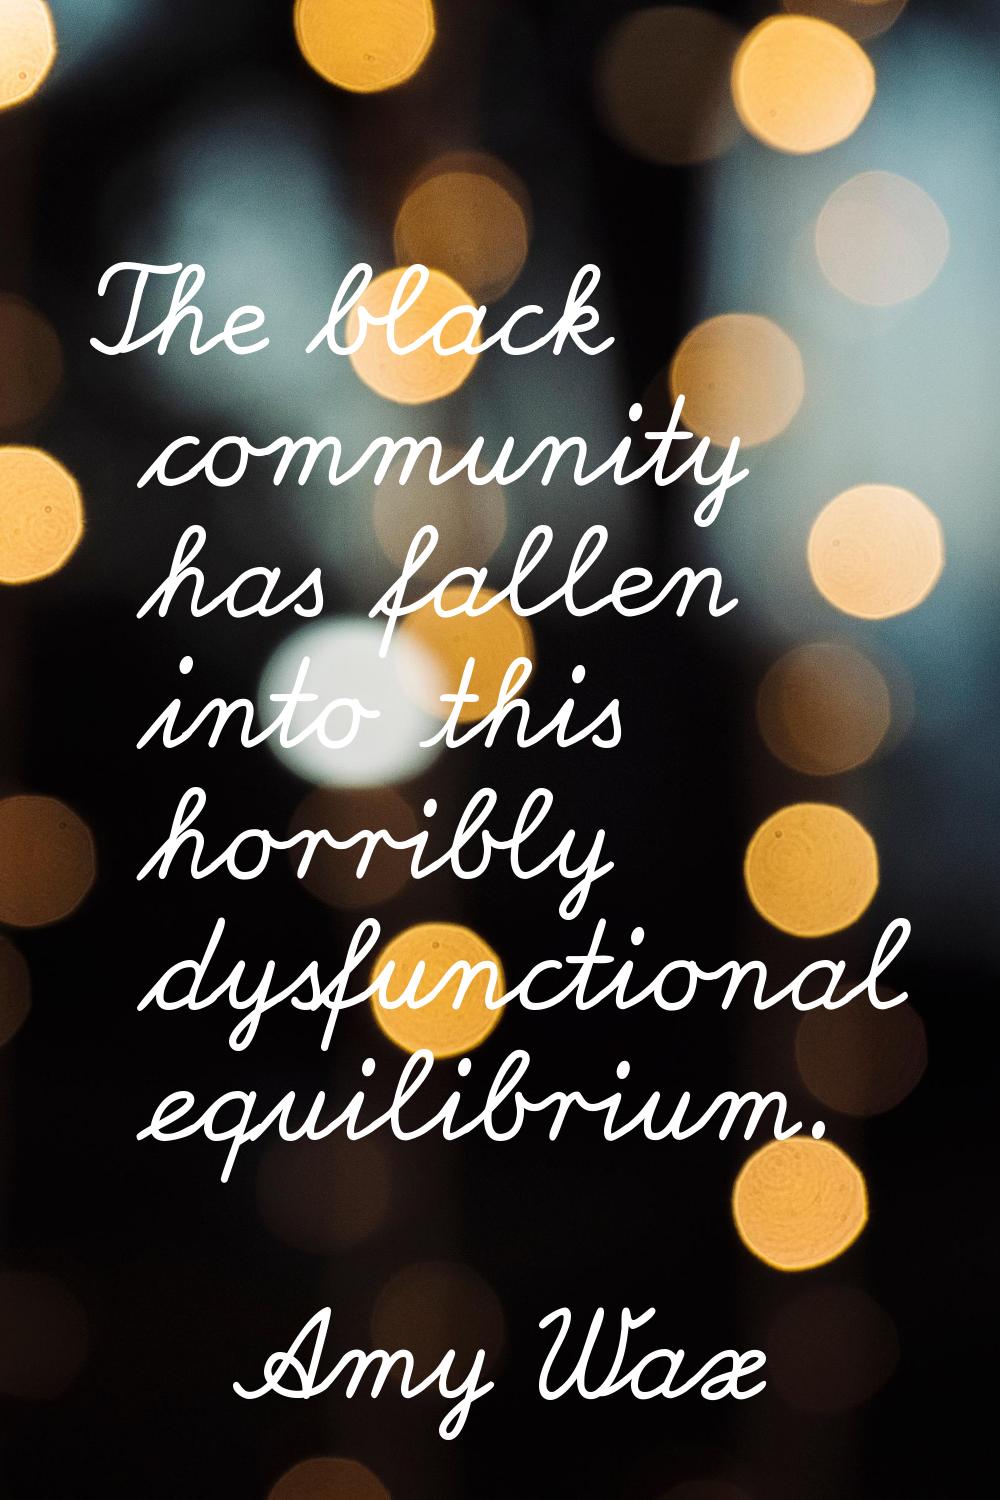 The black community has fallen into this horribly dysfunctional equilibrium.